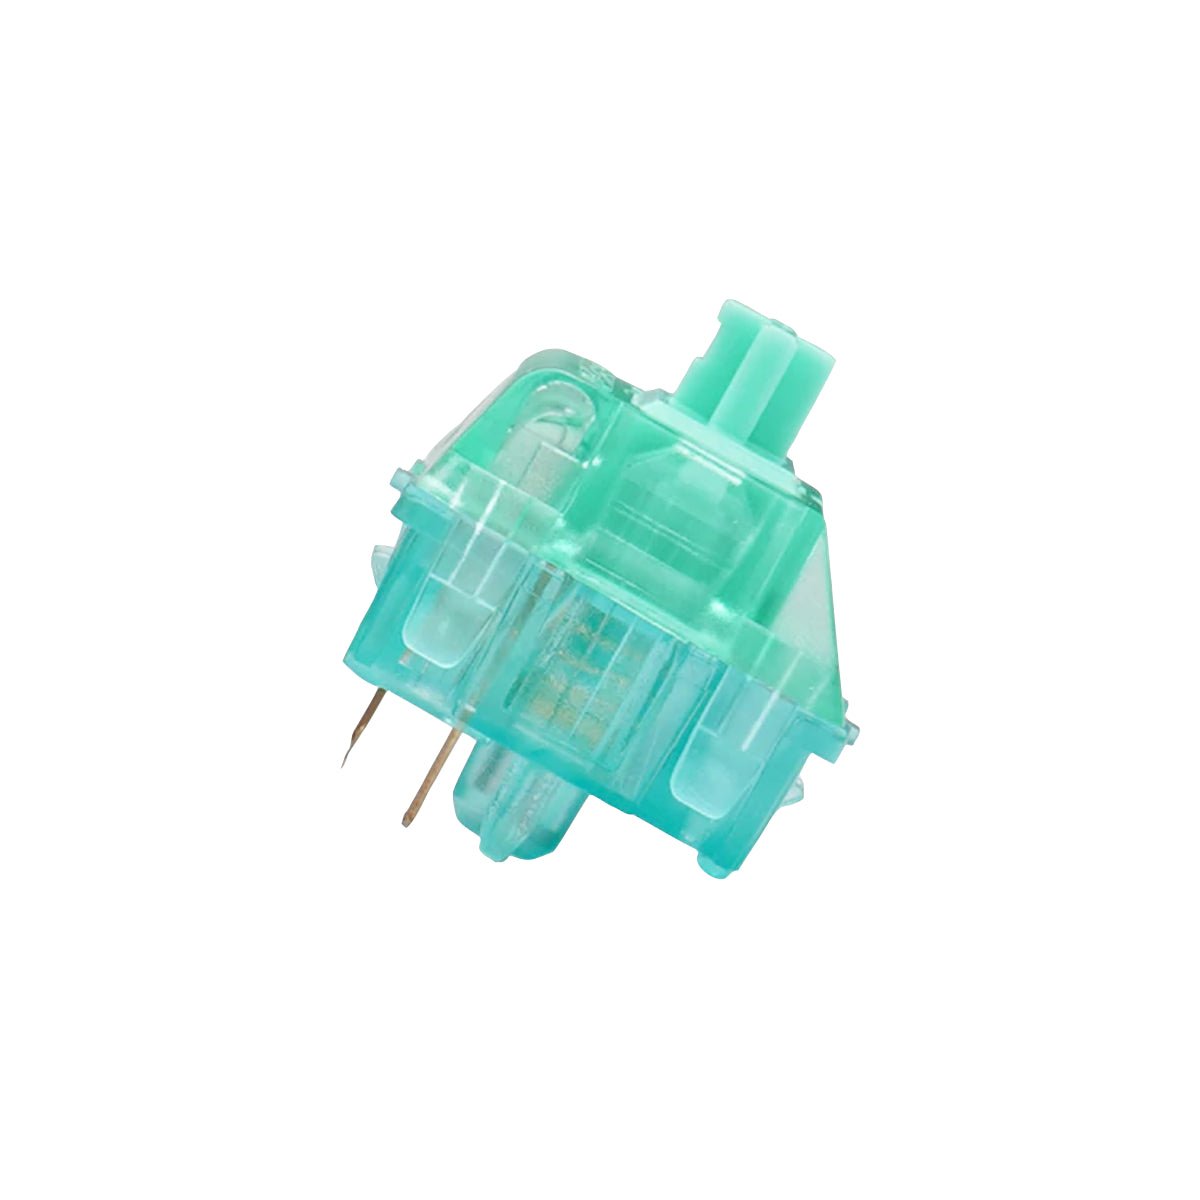 Turquoise Linear Switches 65g - Tealios - 10 Pieces - مكبس لوحة مفاتيح - Store 974 | ستور ٩٧٤